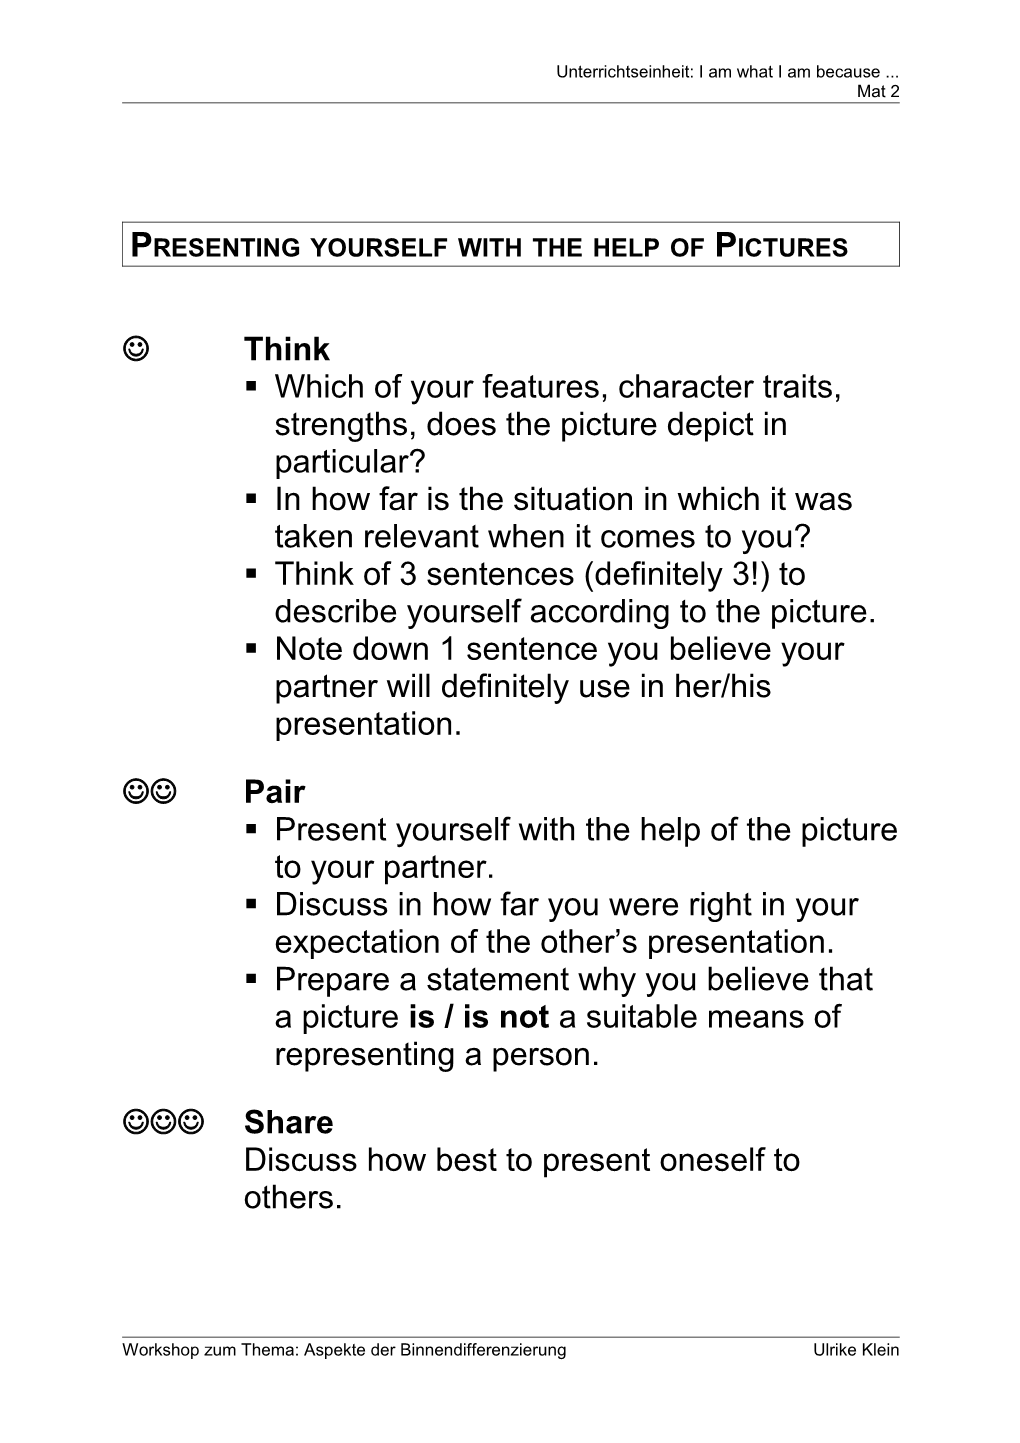 Presenting Yourself with the Help of Pictures